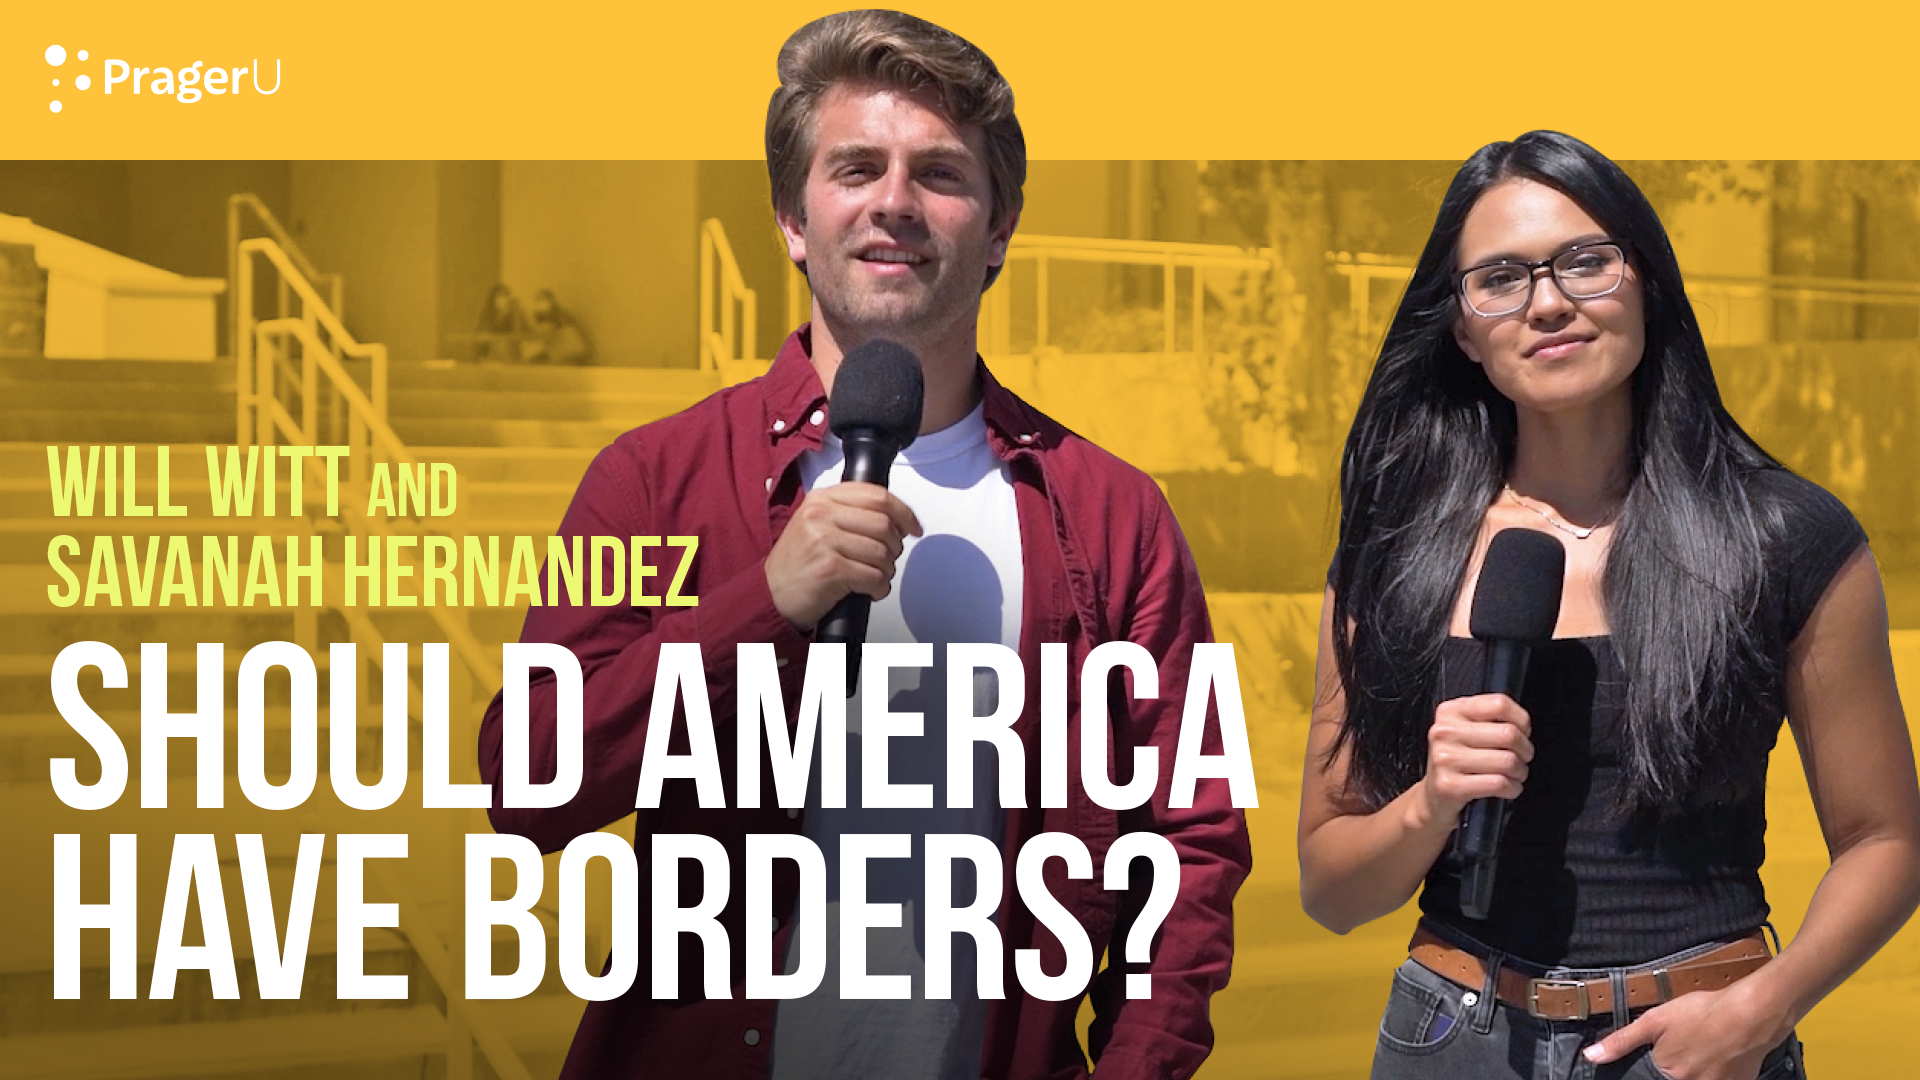 Should America Have Borders?